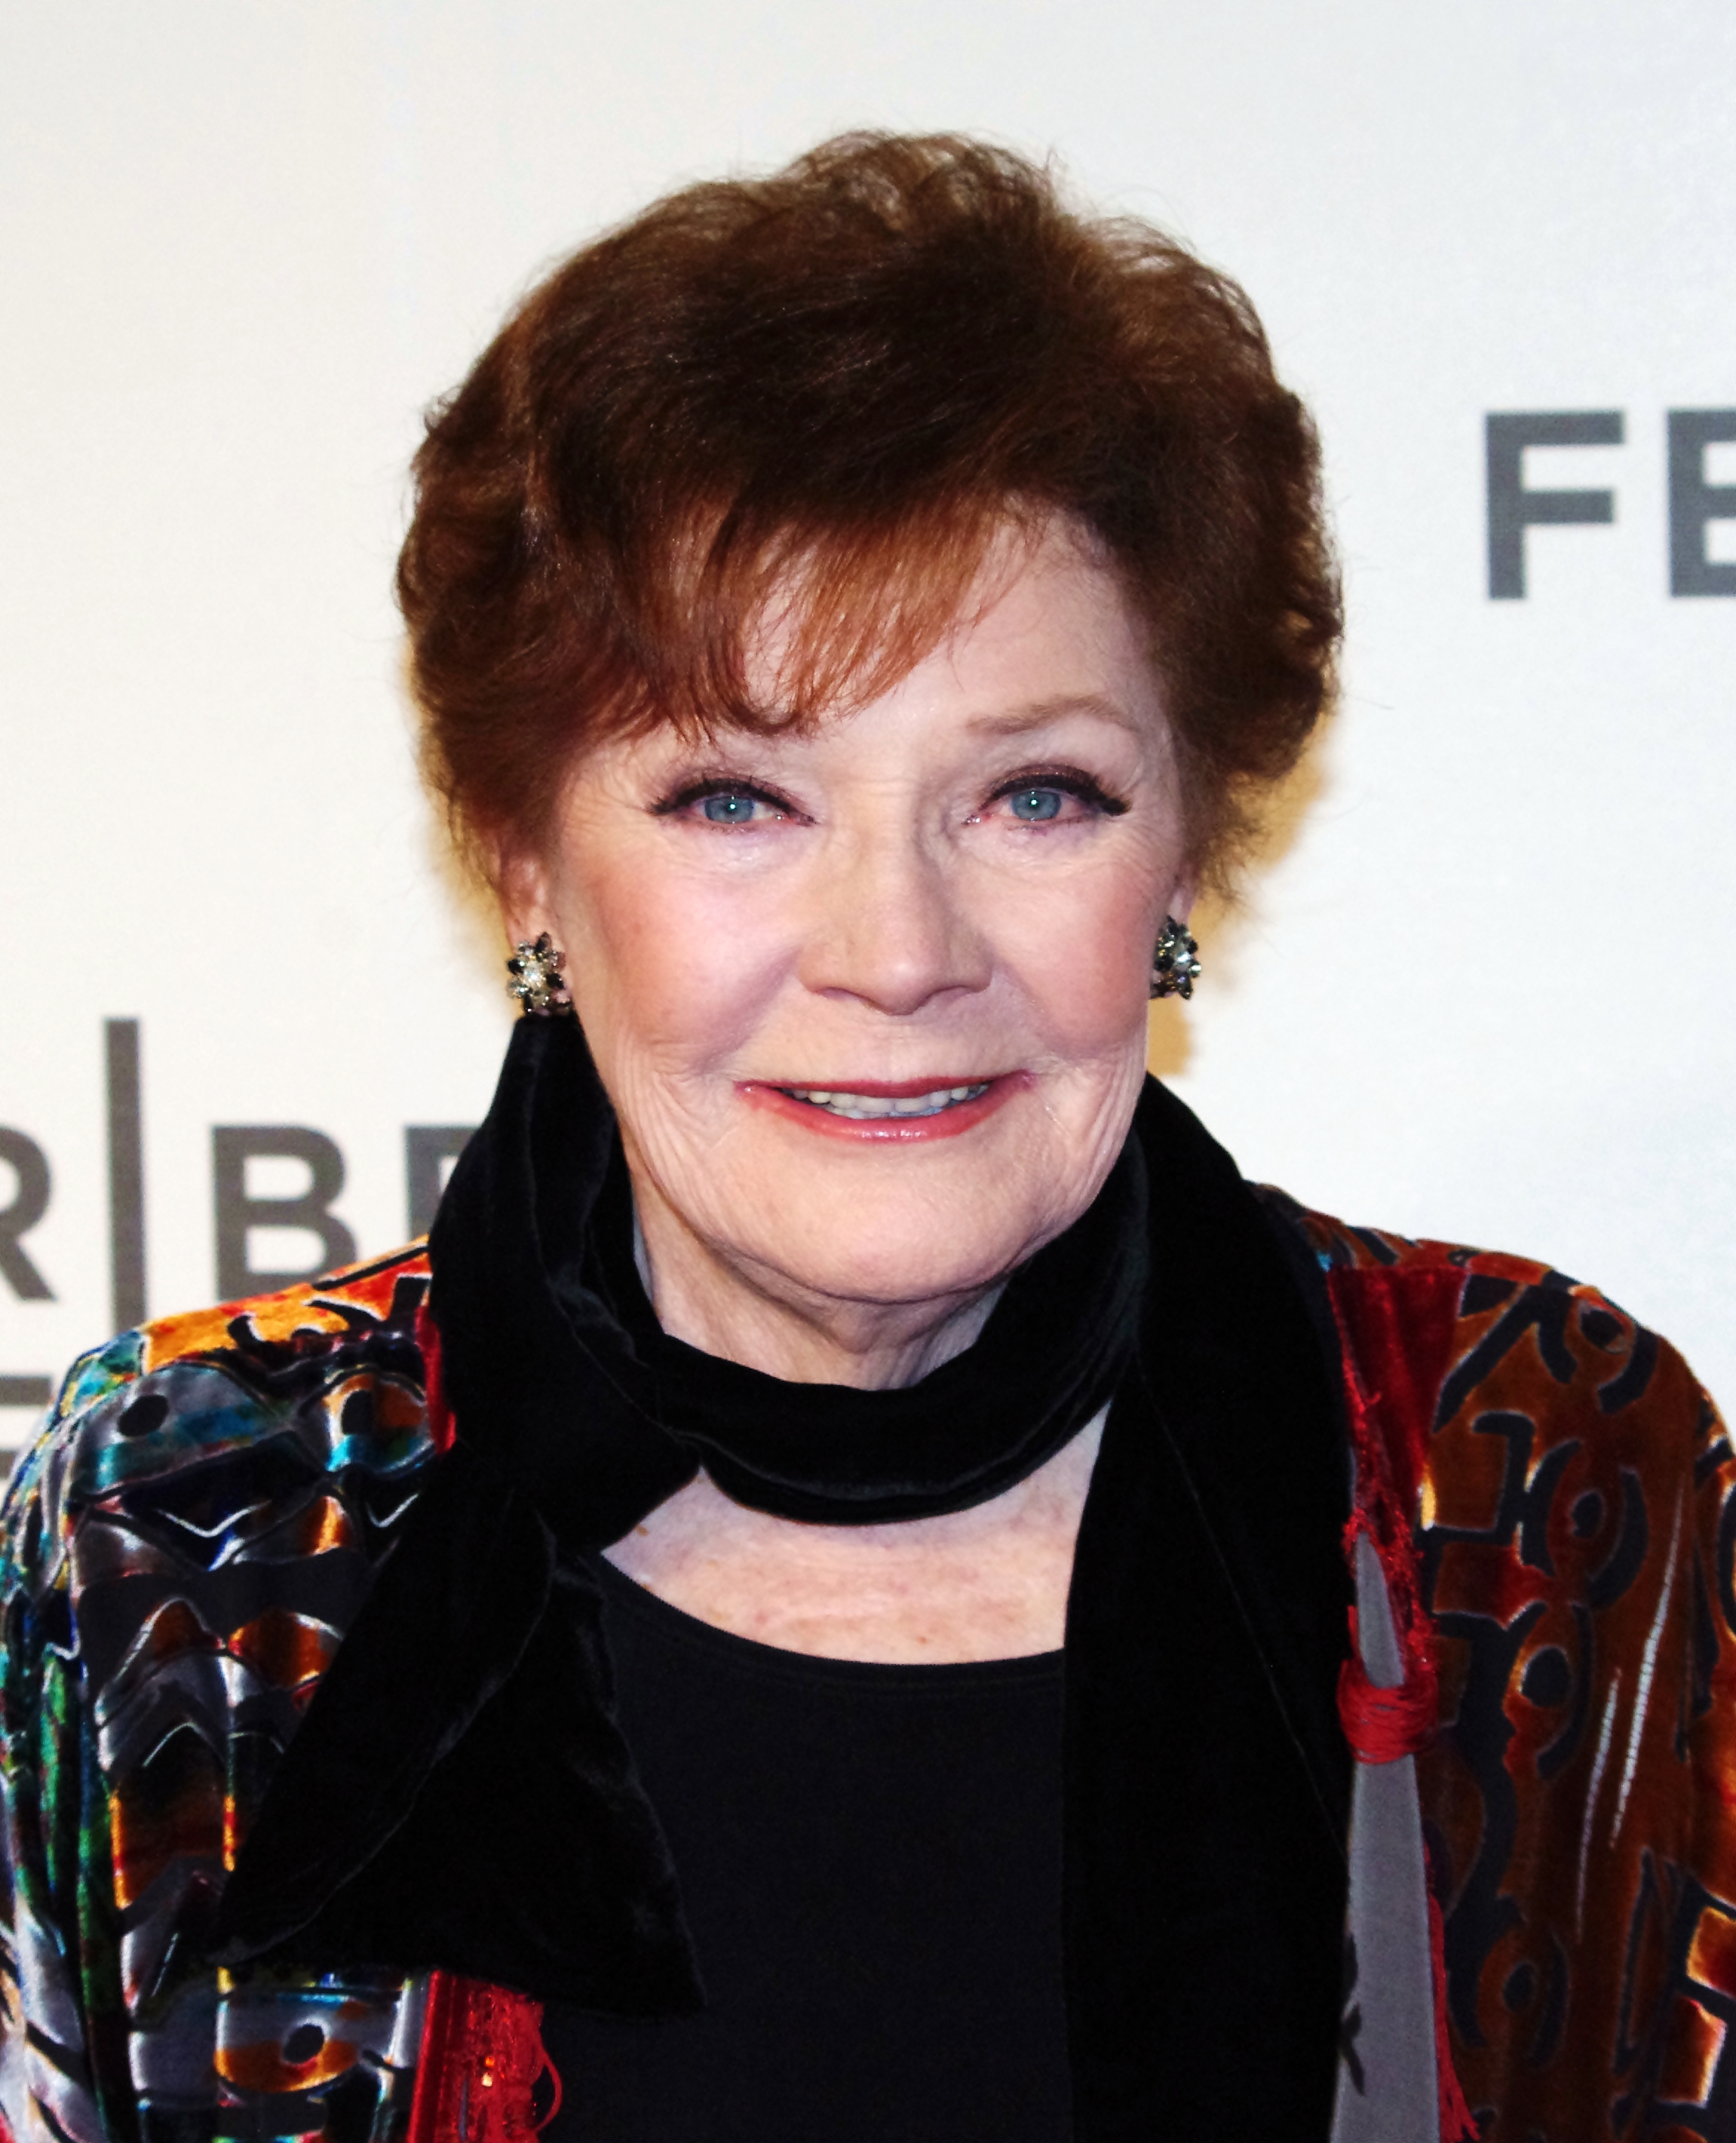 polly-bergen-pictures